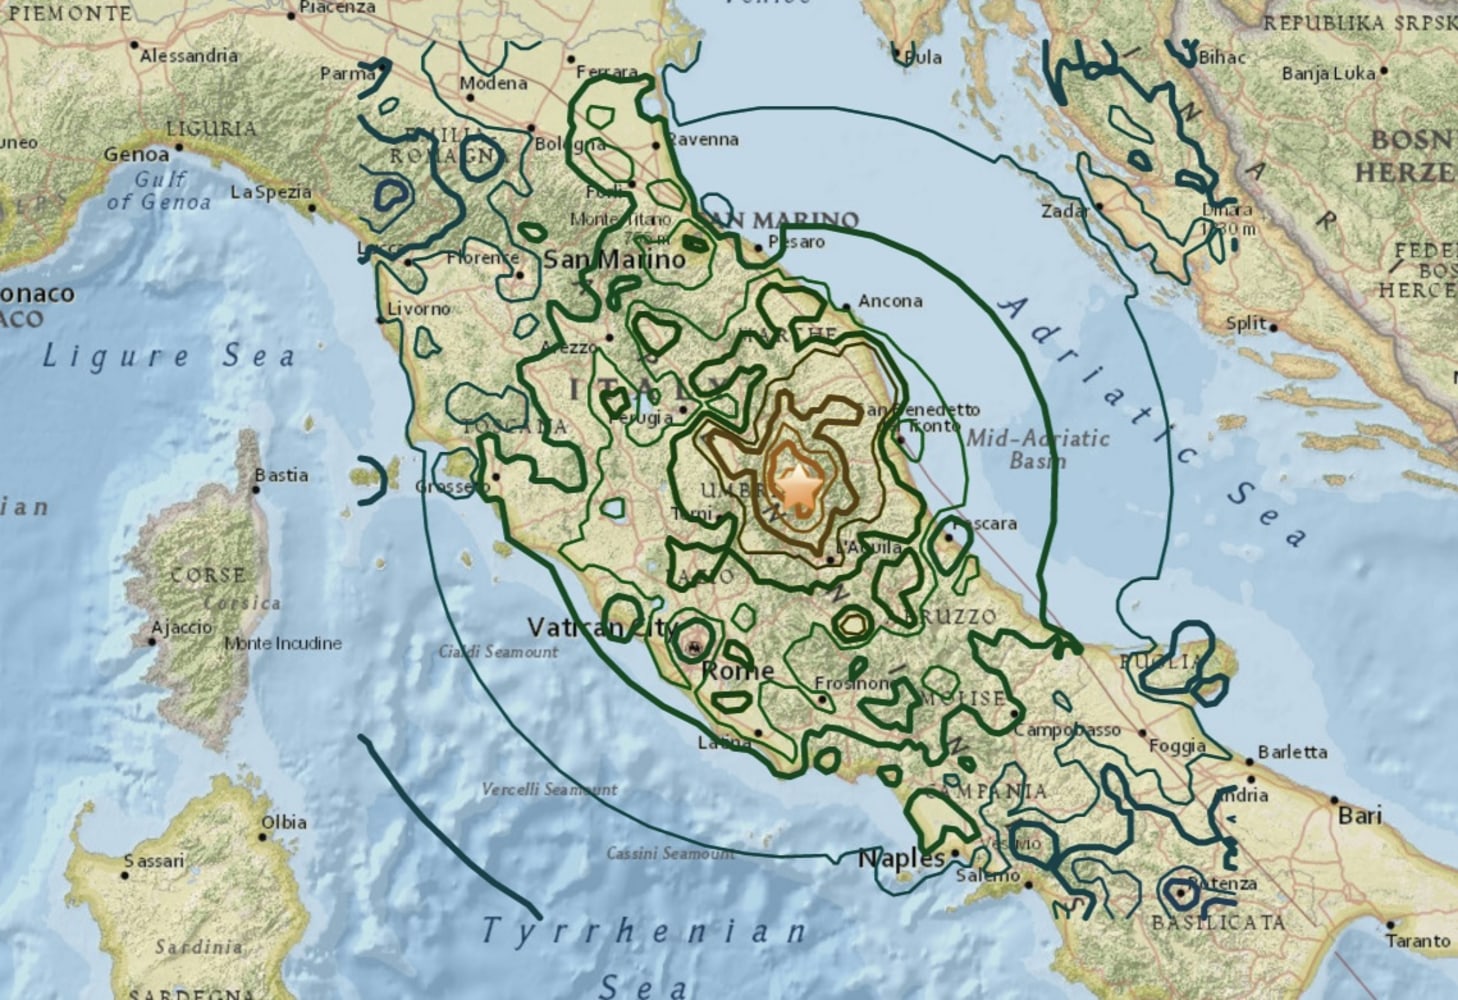 Italian Earthquake A Tragedy Hundreds of Millions of Years in the